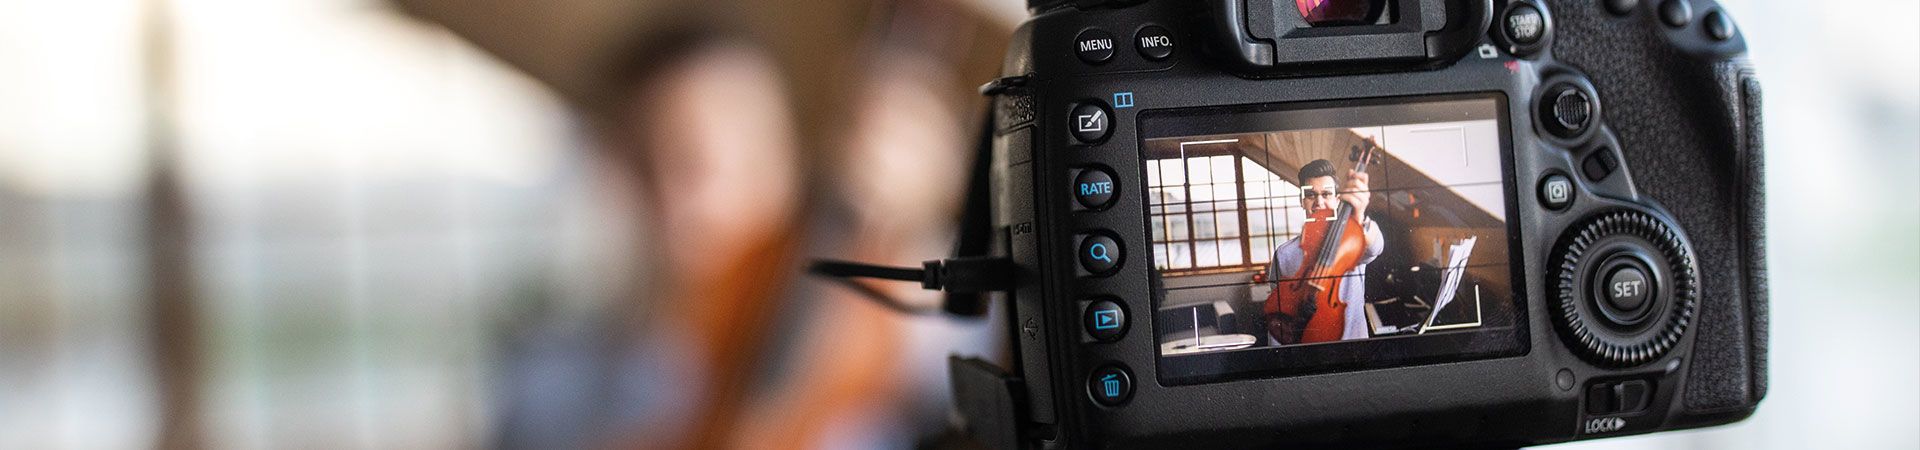 Taking great photos – a photographer uses a grid in the display to align his camera.